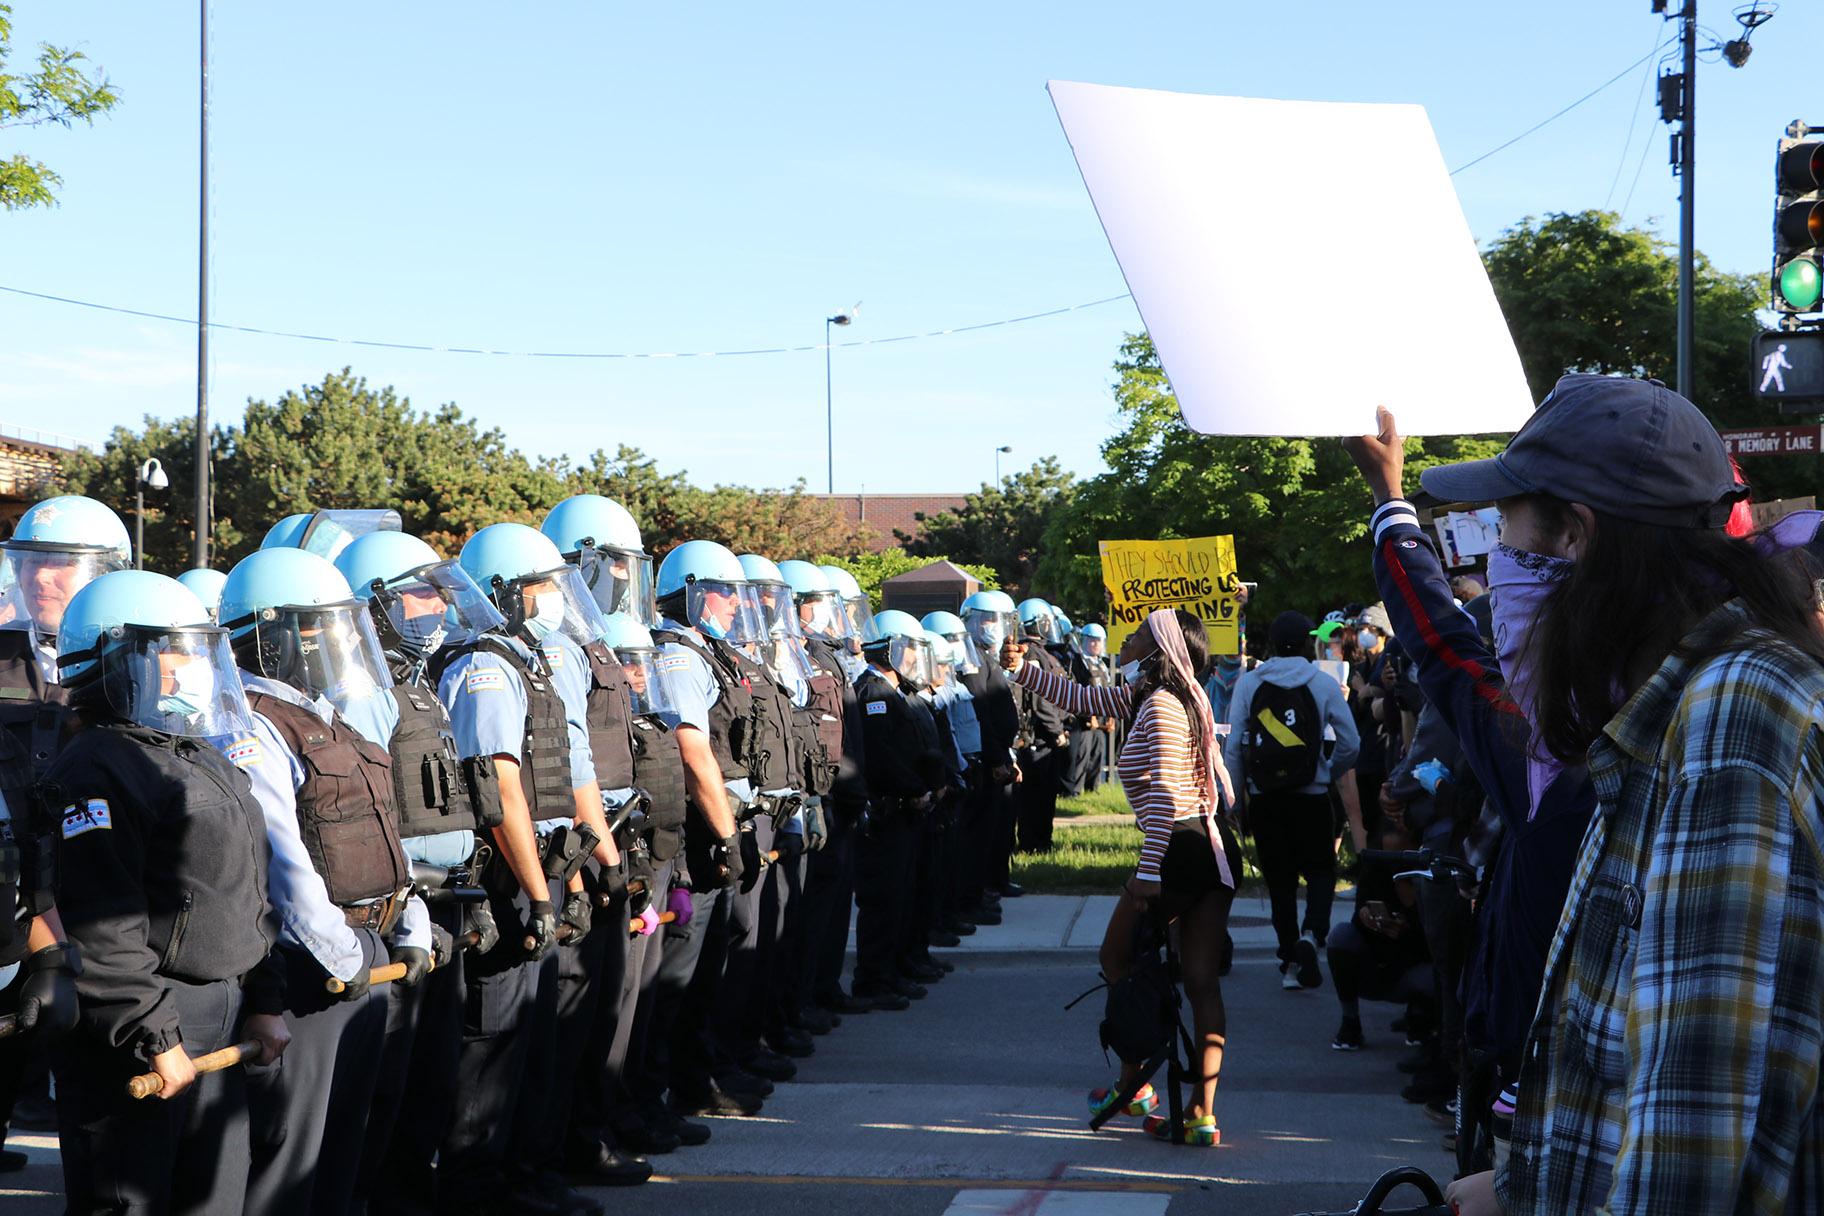 Protesters yell at a line of police officers at State and 35th streets, about 3 miles south of the Loop, where police set up a blockade on Sunday, May 31, 2020. (Evan Garcia / WTTW News)